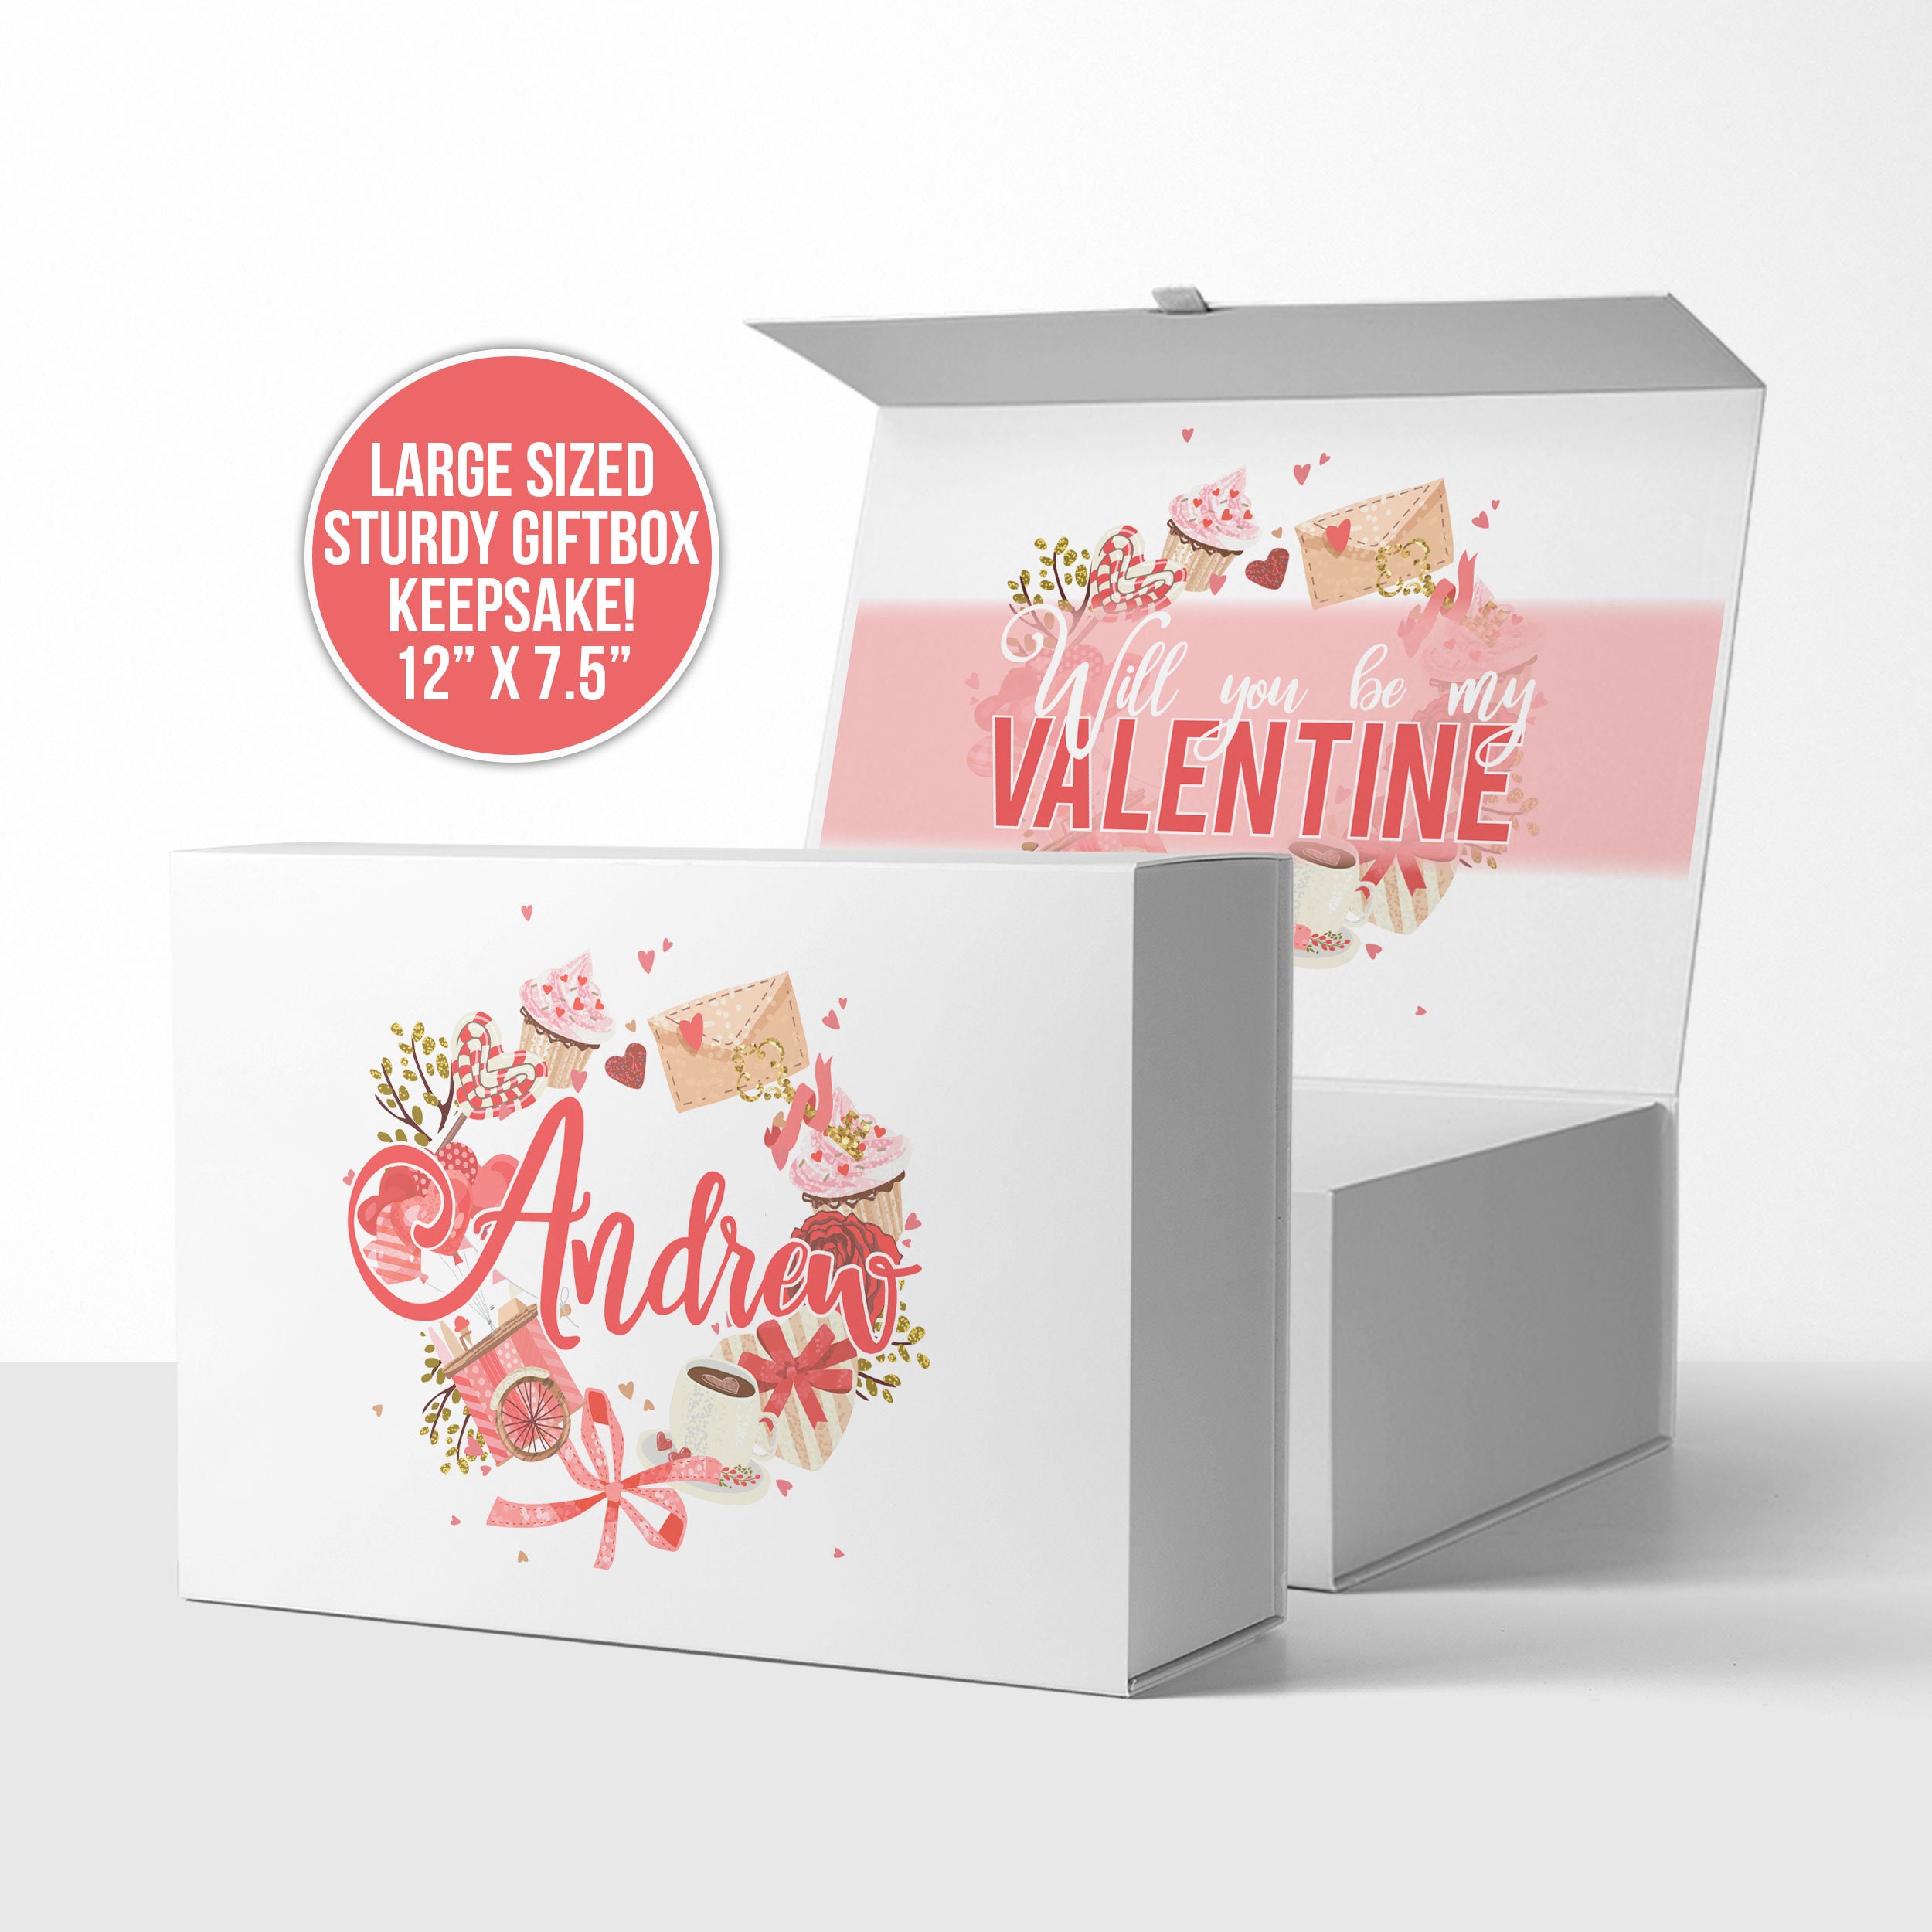 Valentine's Day Surprise Gift Box Explosion,birthday Party Pop Gift  Box,surprise Couple Gifts Surprise Pop Box With Sprayed Bills or Photos 